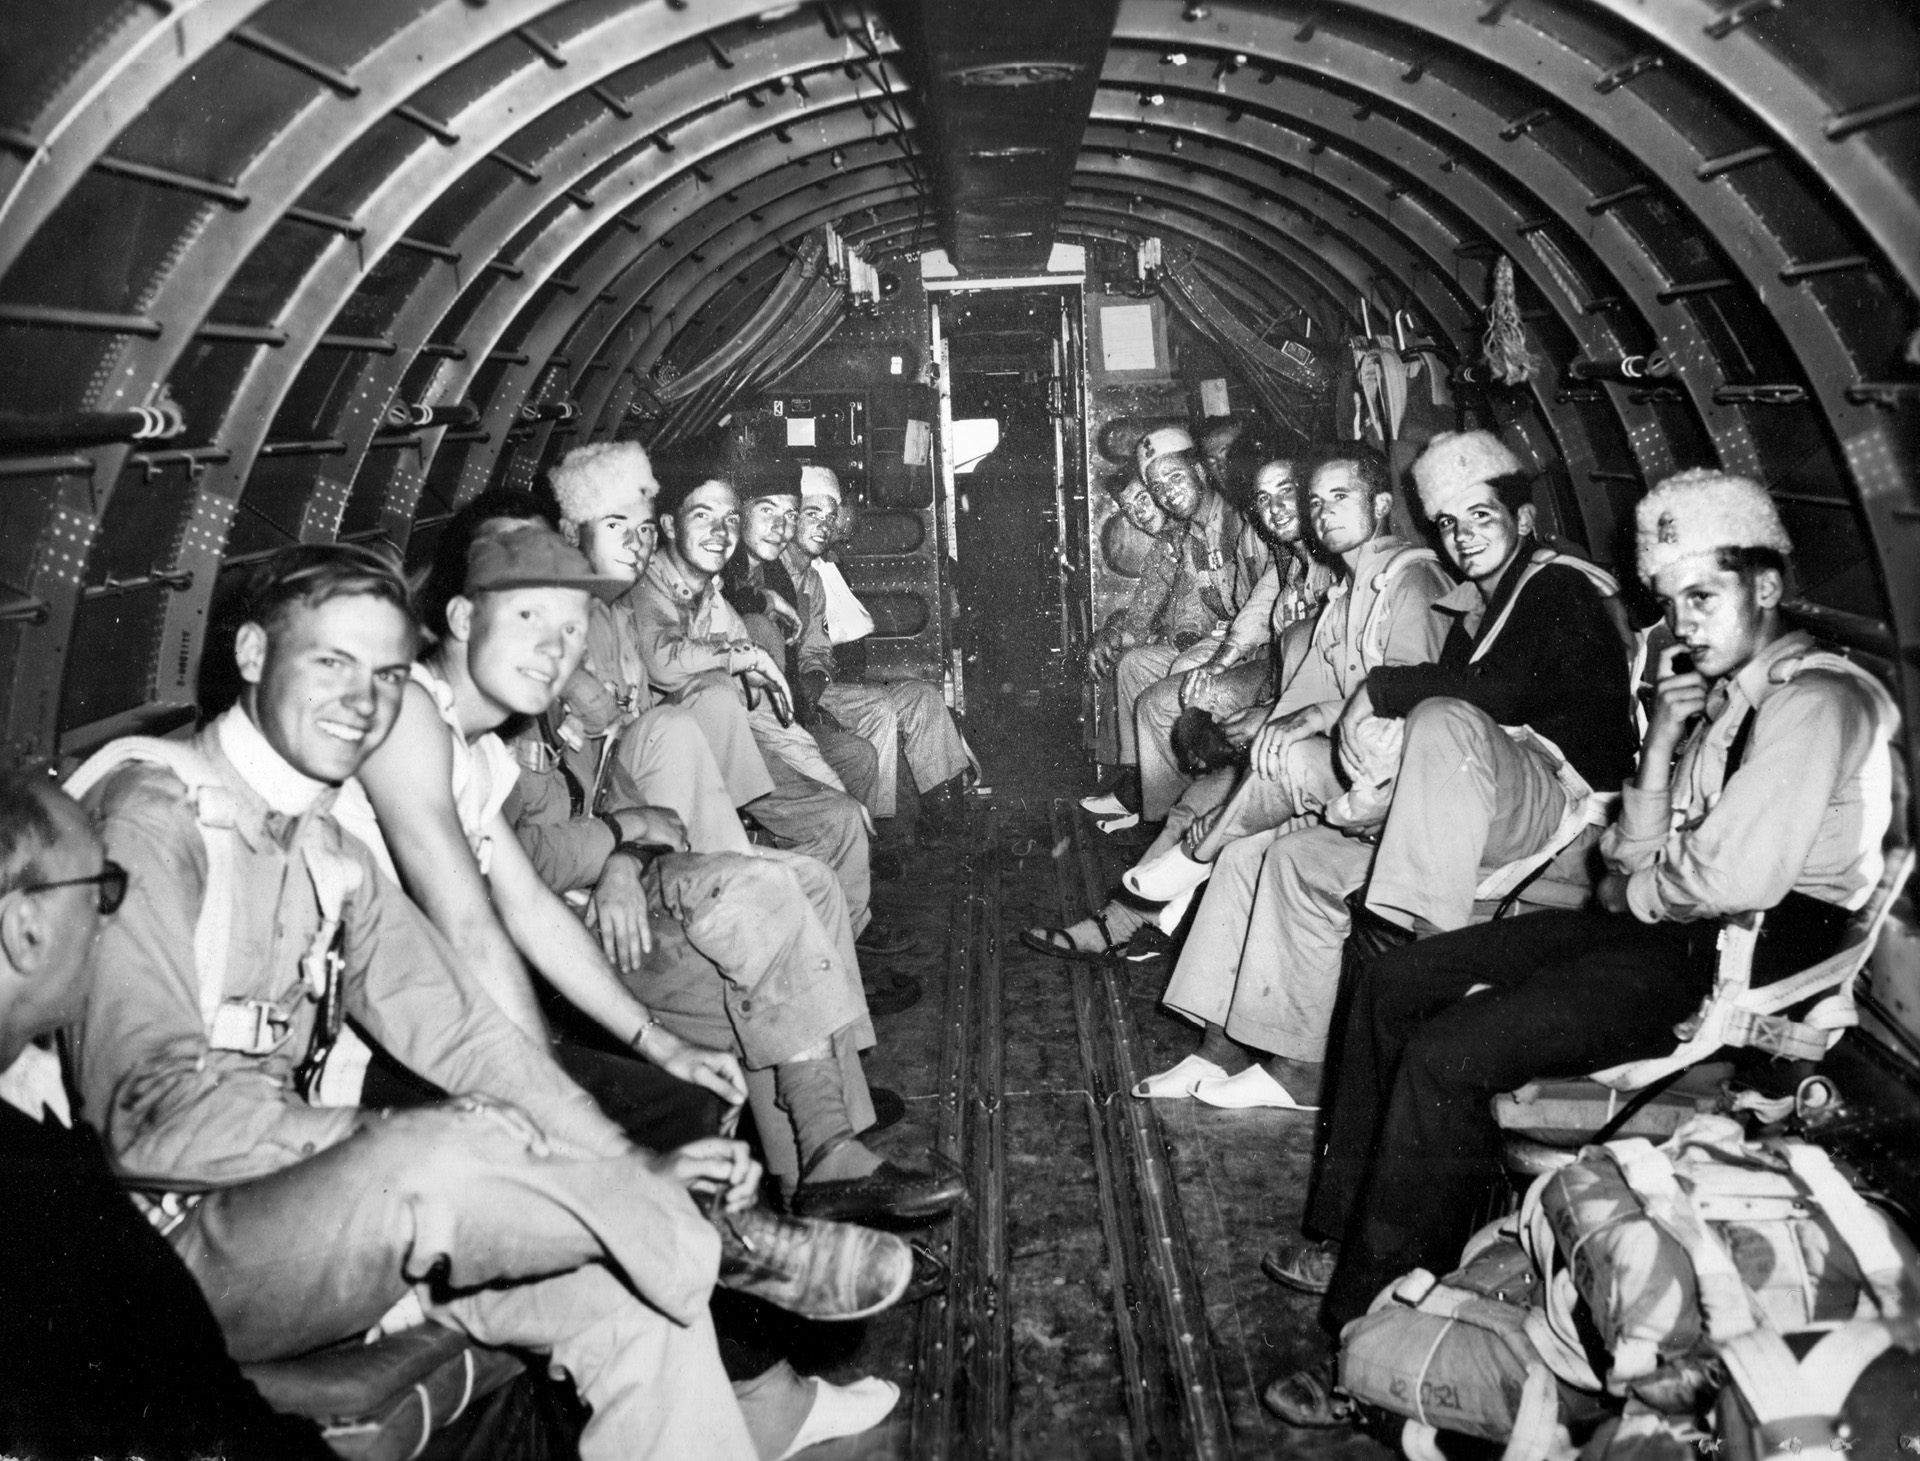 Smiling in anticipation of their return to Allied territory, a group of downed airmen sit aboard a C-47 transport plane. This photo was taken during a flight from an airstrip at Koceljeva on September 17, 1944.